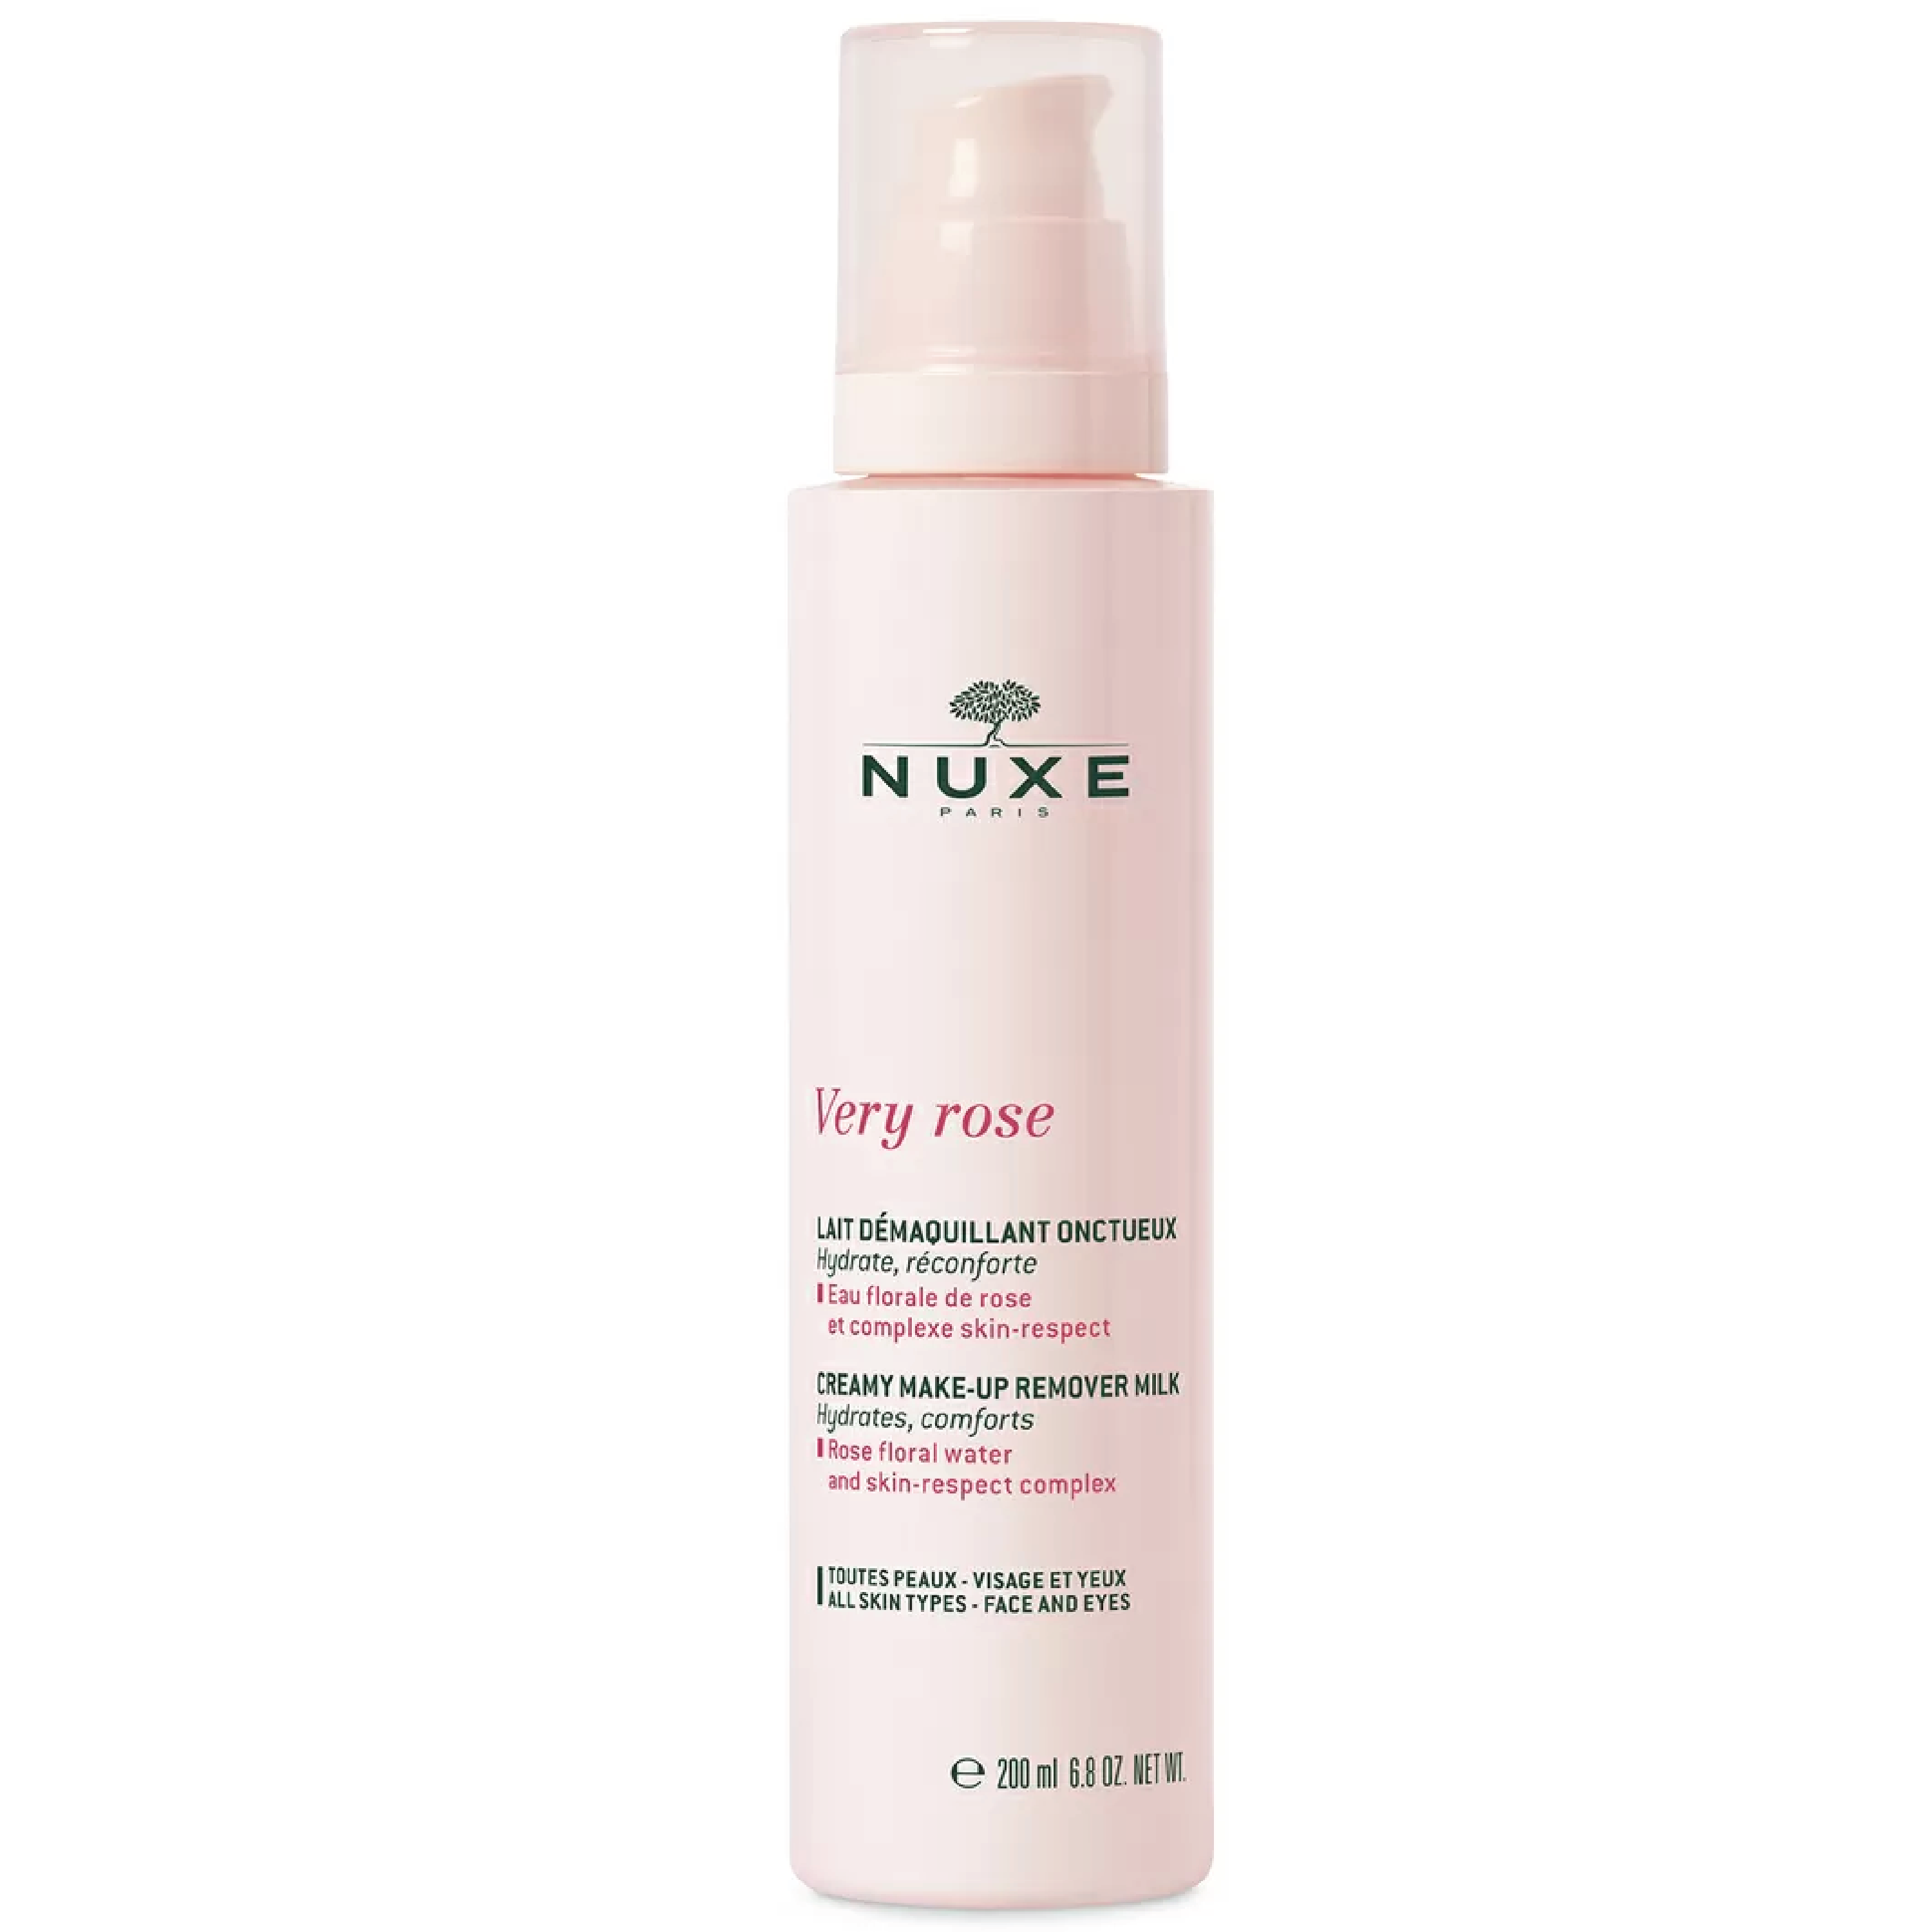 NUXE Very Rose Creamy Make-up Remover Milk, 200 ml